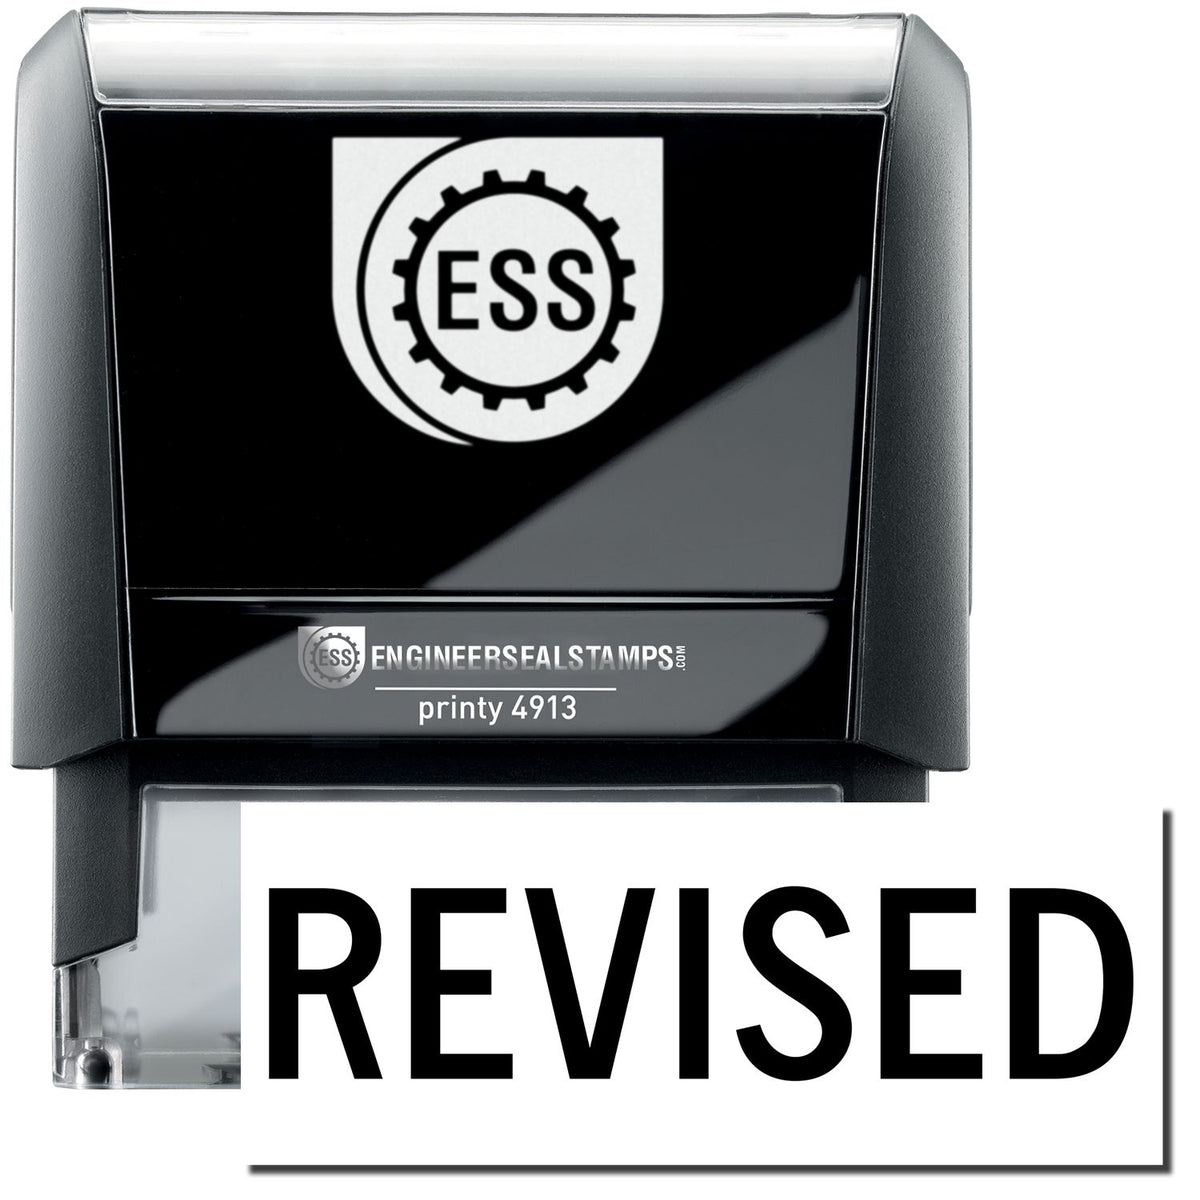 A self-inking stamp with a stamped image showing how the text &quot;REVISED&quot; in a large bold font is displayed by it.